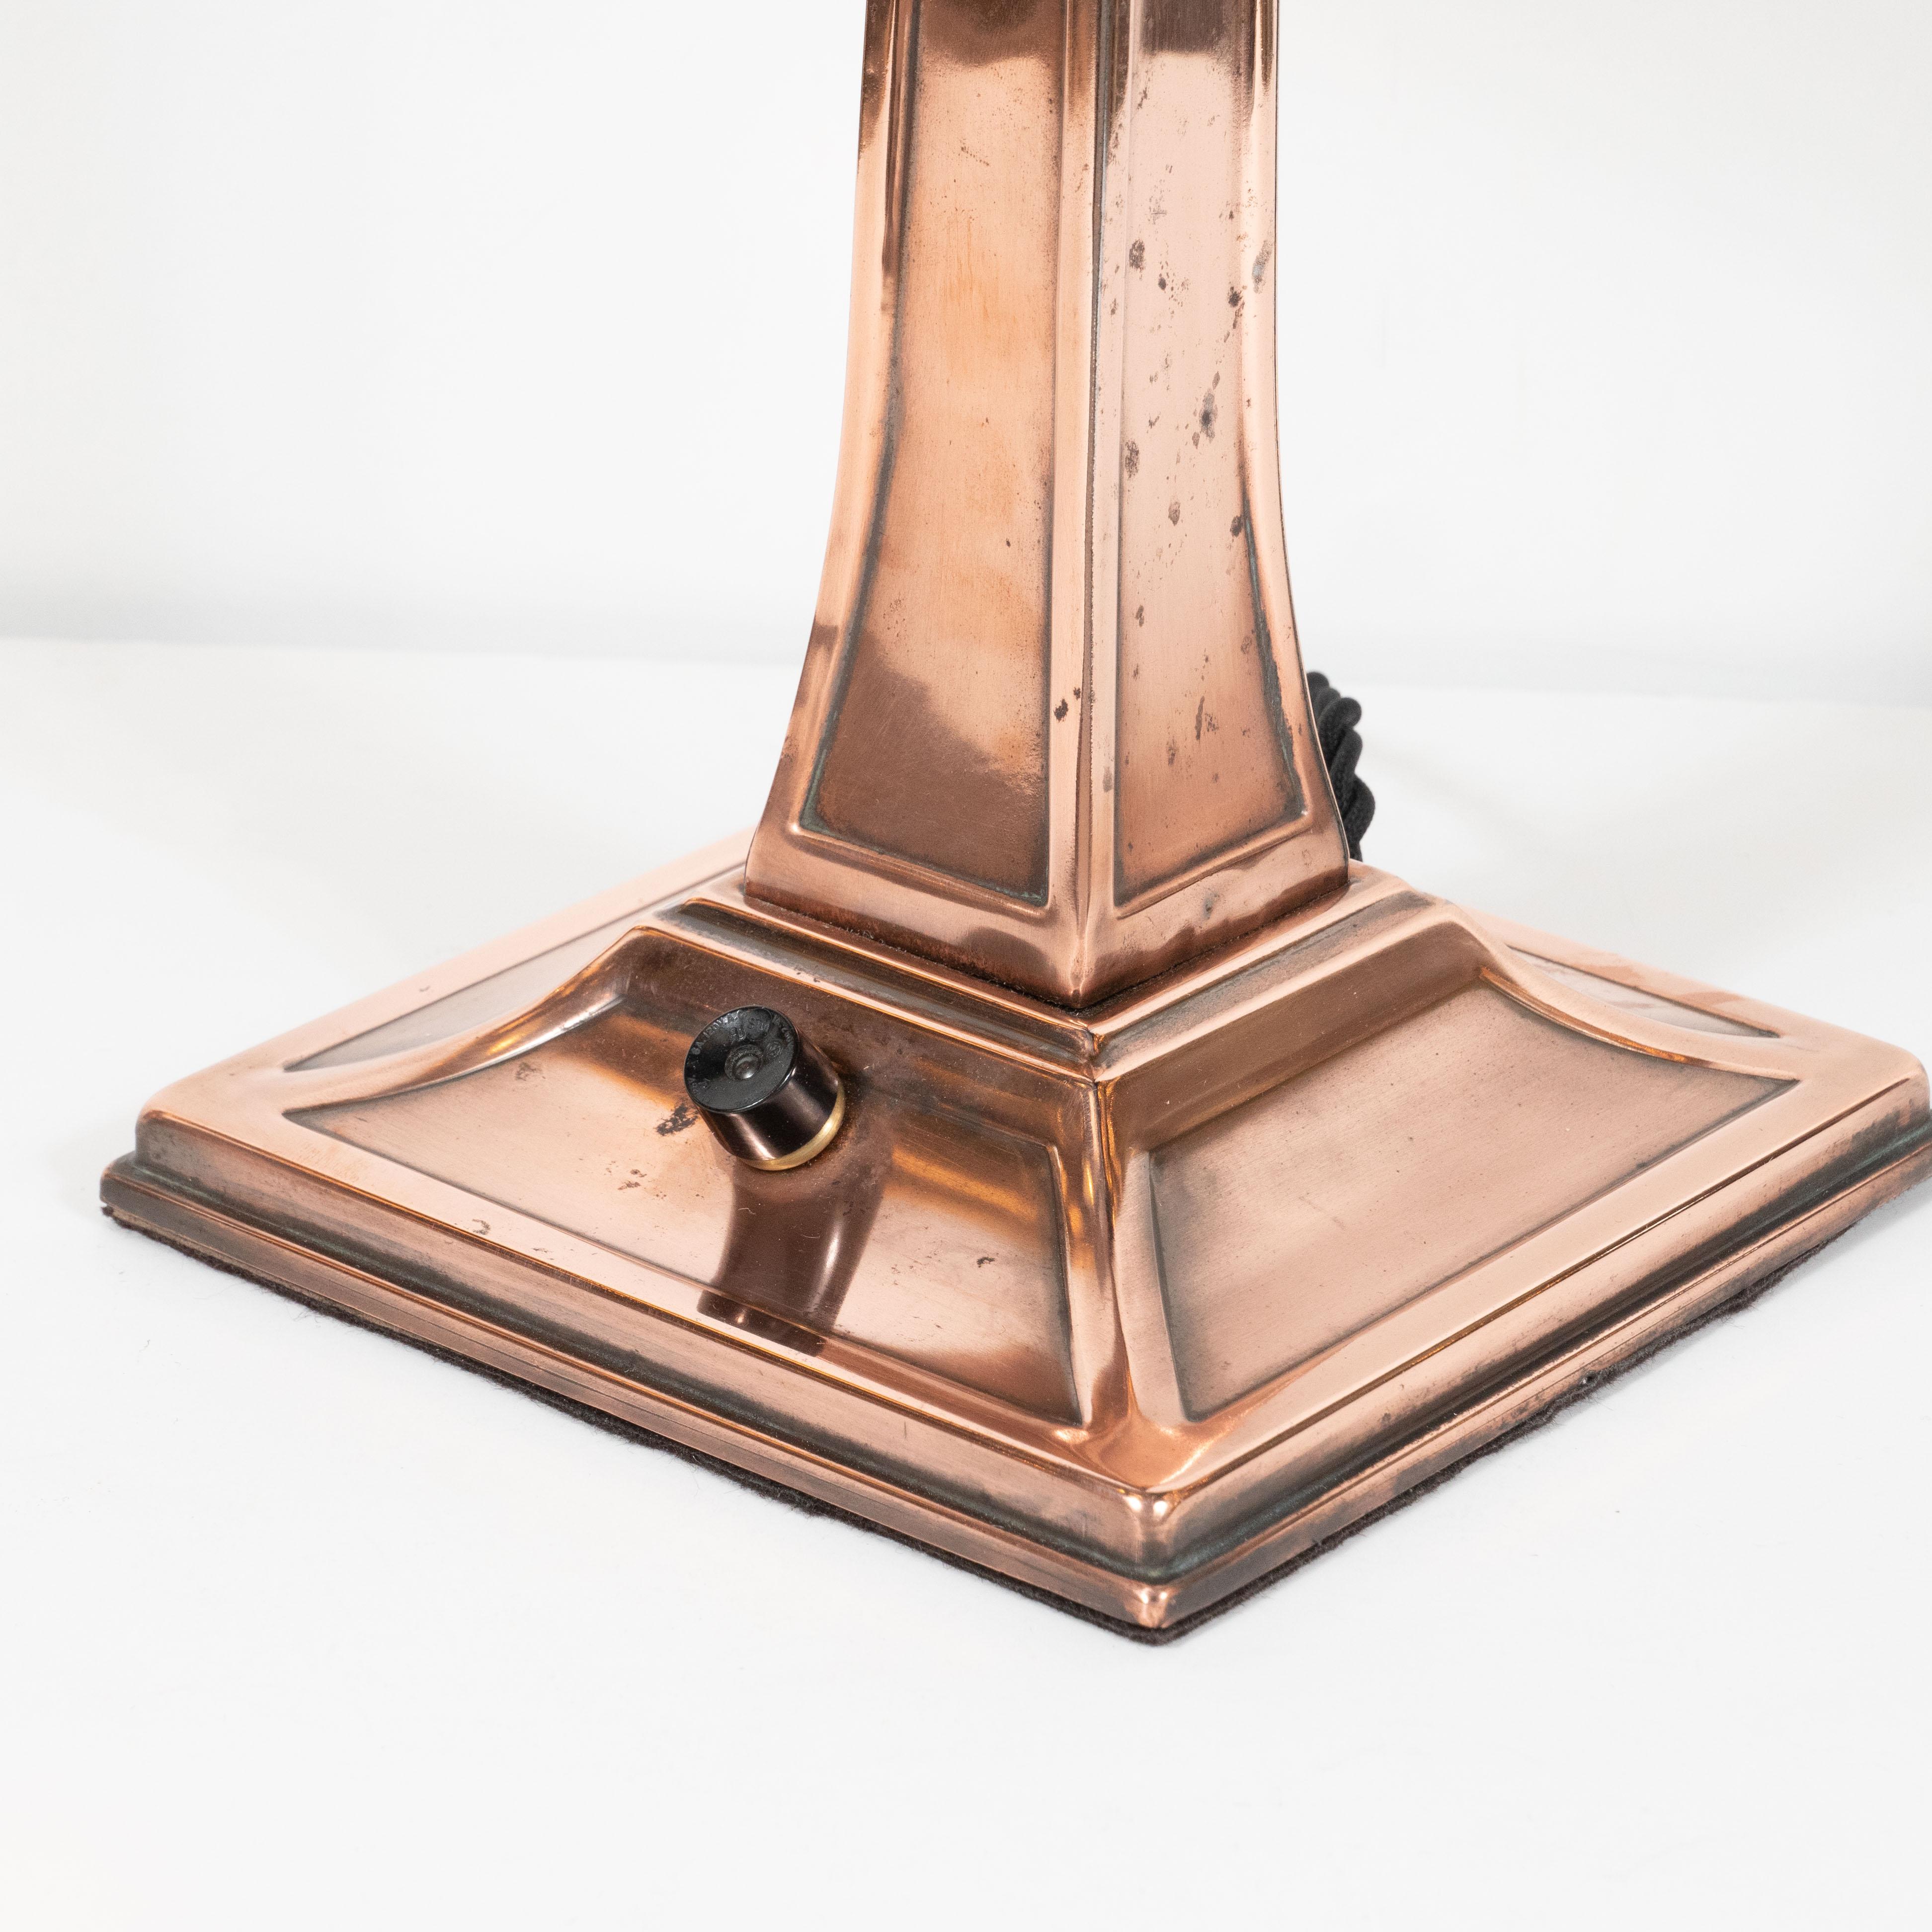 Early Art Deco Copper & Polished Aluminum Table Lamp with Cubist Embellishment For Sale 3